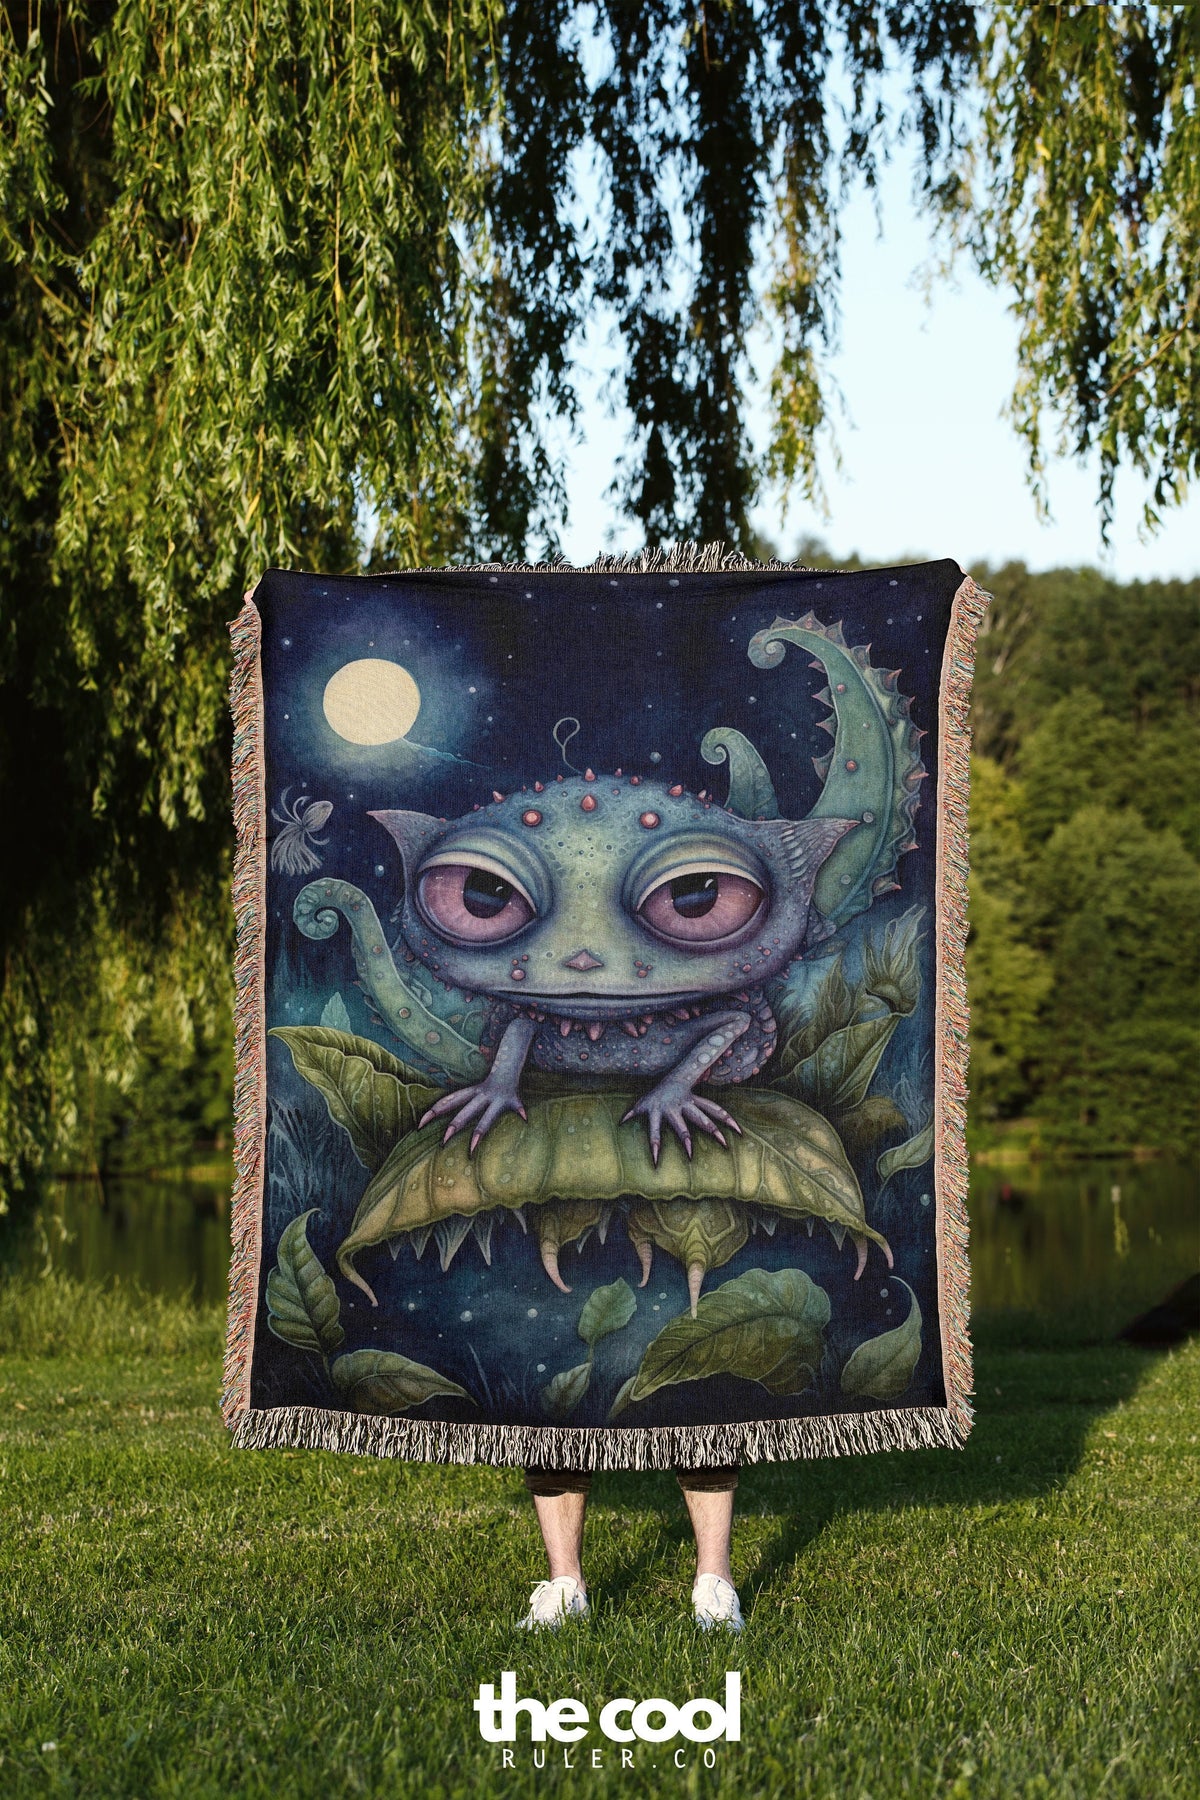 a woman standing in the grass holding a blanket with an image of a creature on